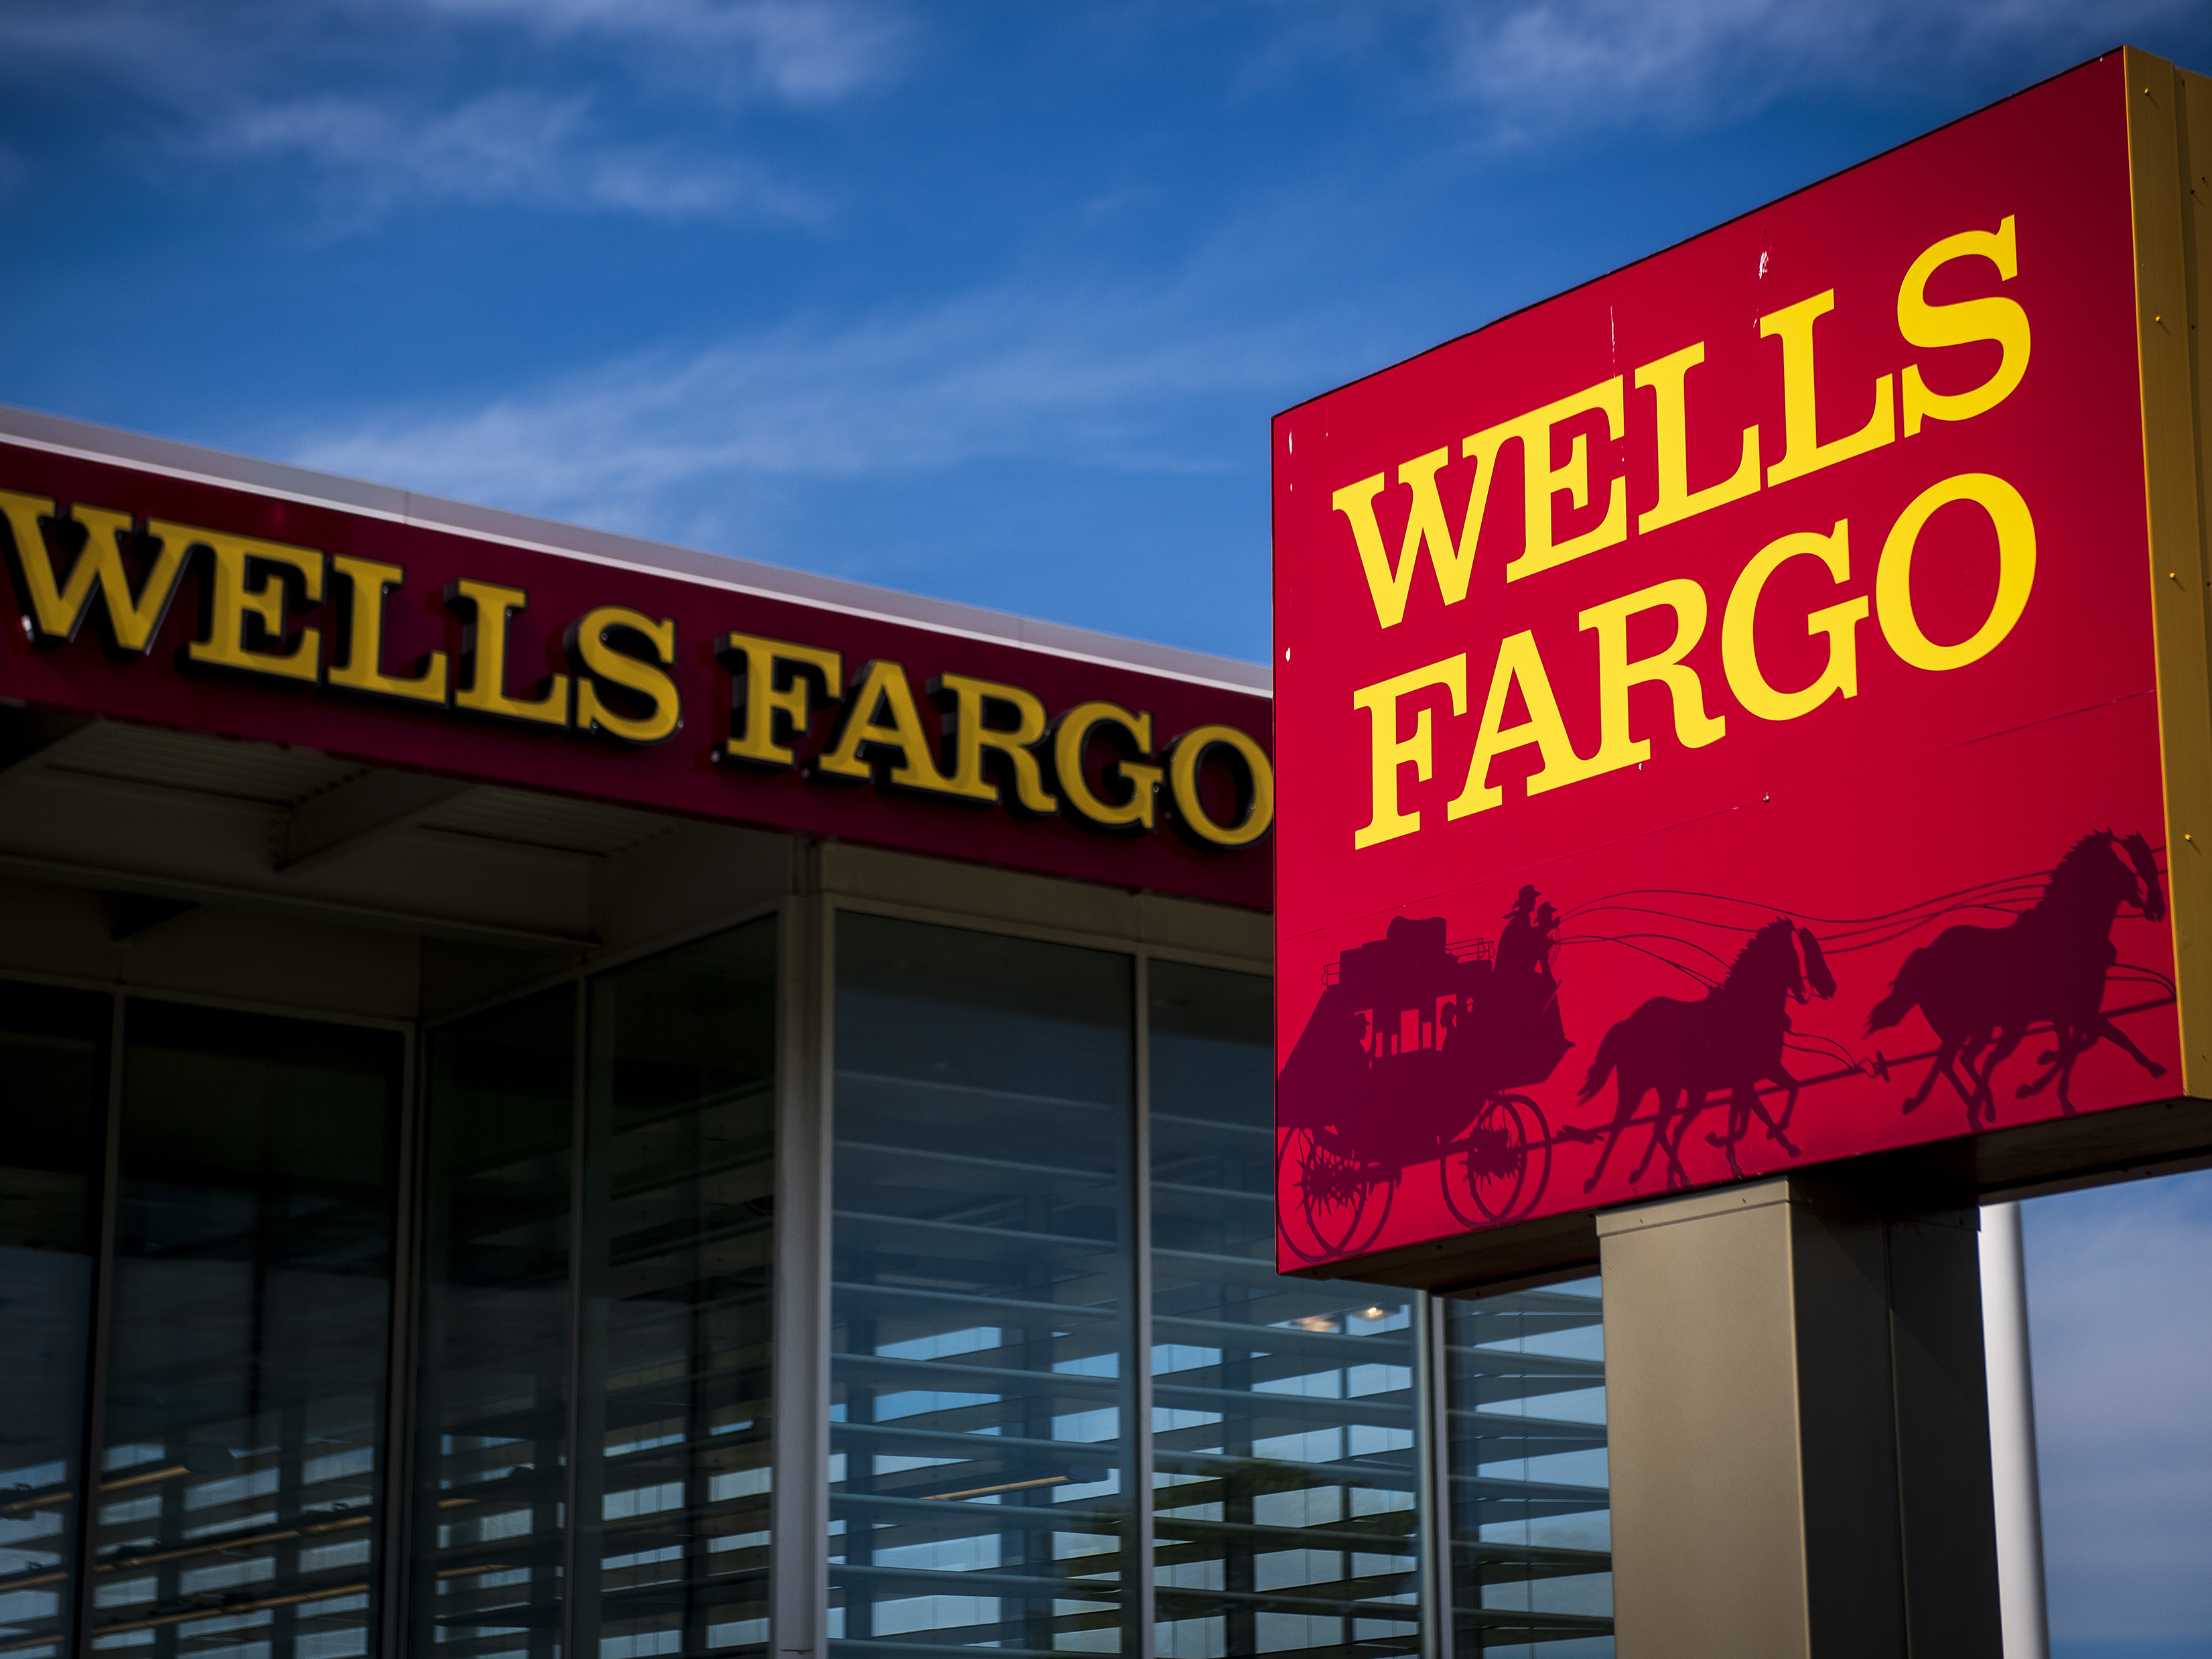 How to Order by Cell Phone - Wells Fargo Credit Cards: Cash Wise Visa